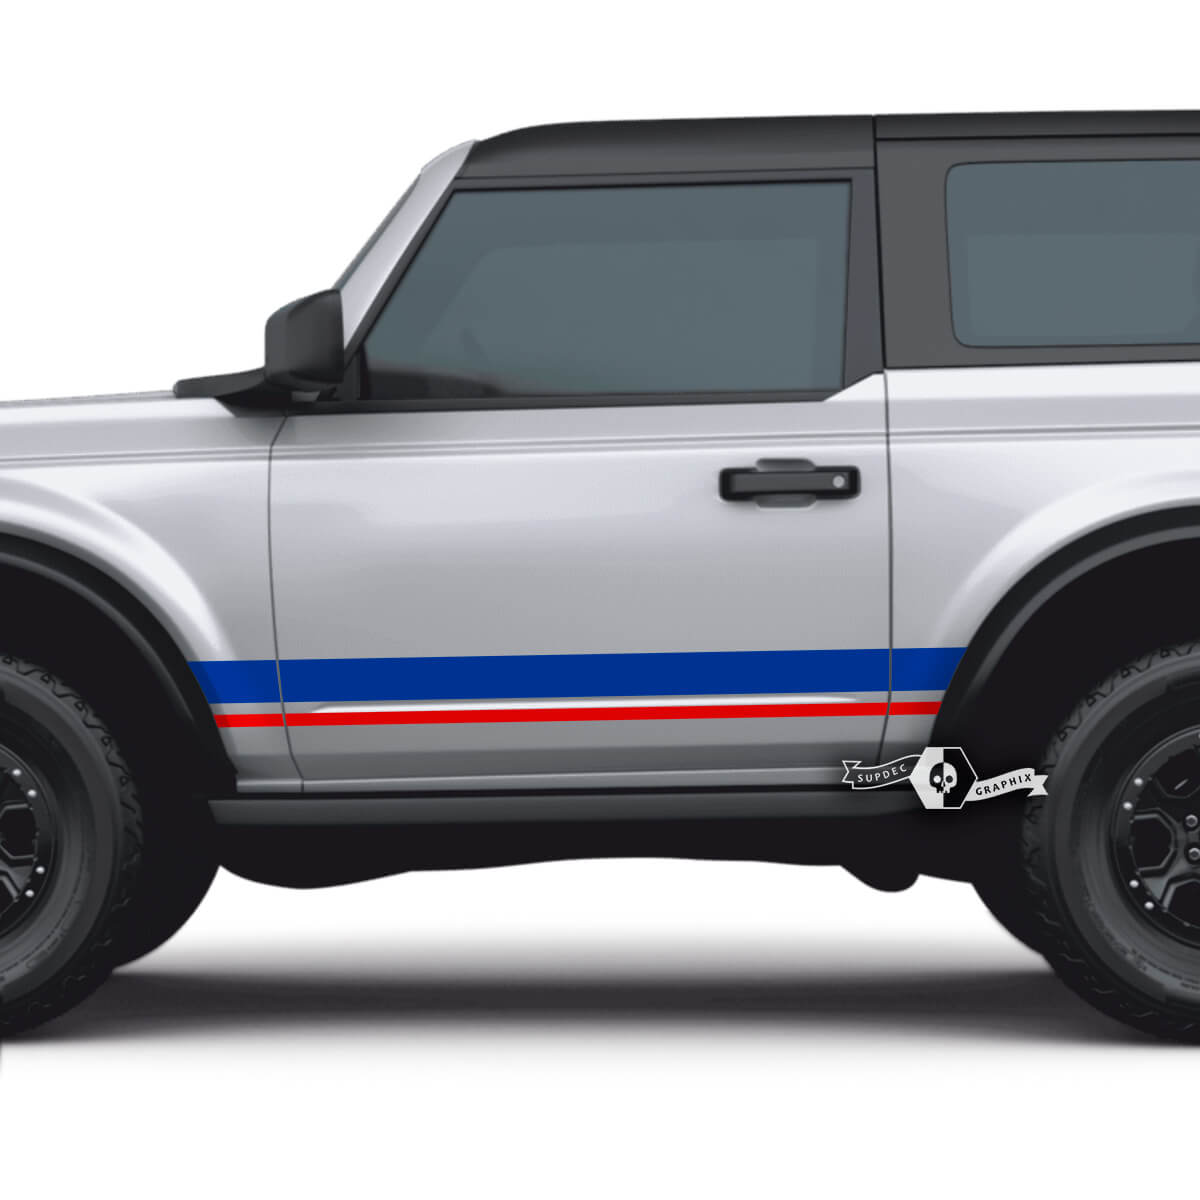 Pair of 2 Doors Ford Bronco Side Decals Stripes Stickers for Ford Bronco 2 Colors
